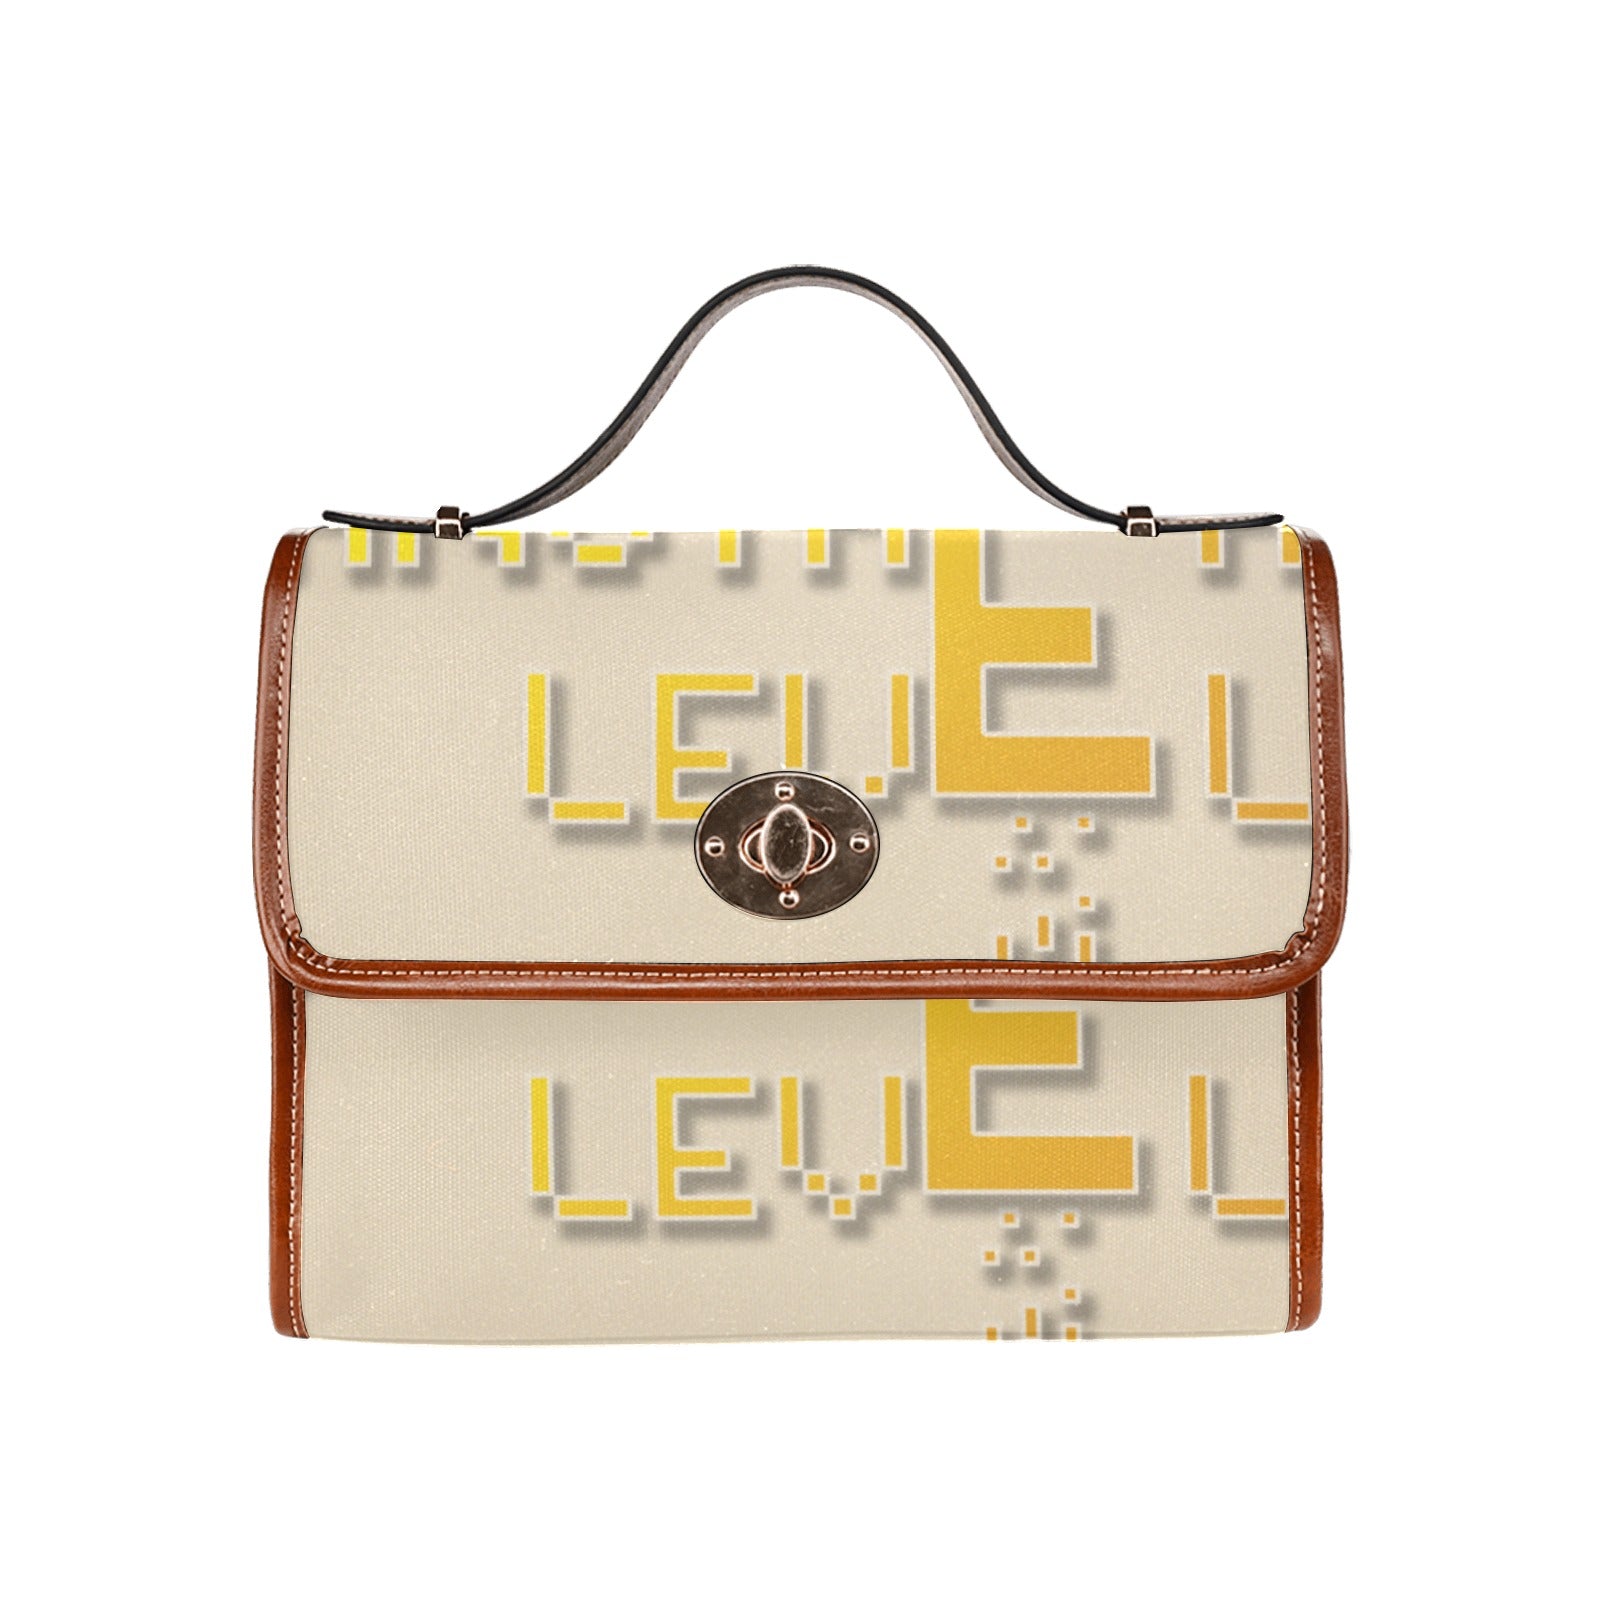 fz yellow levels handbag one size / fz - levels bag-creme all over print waterproof canvas bag(model1641)(brown strap)